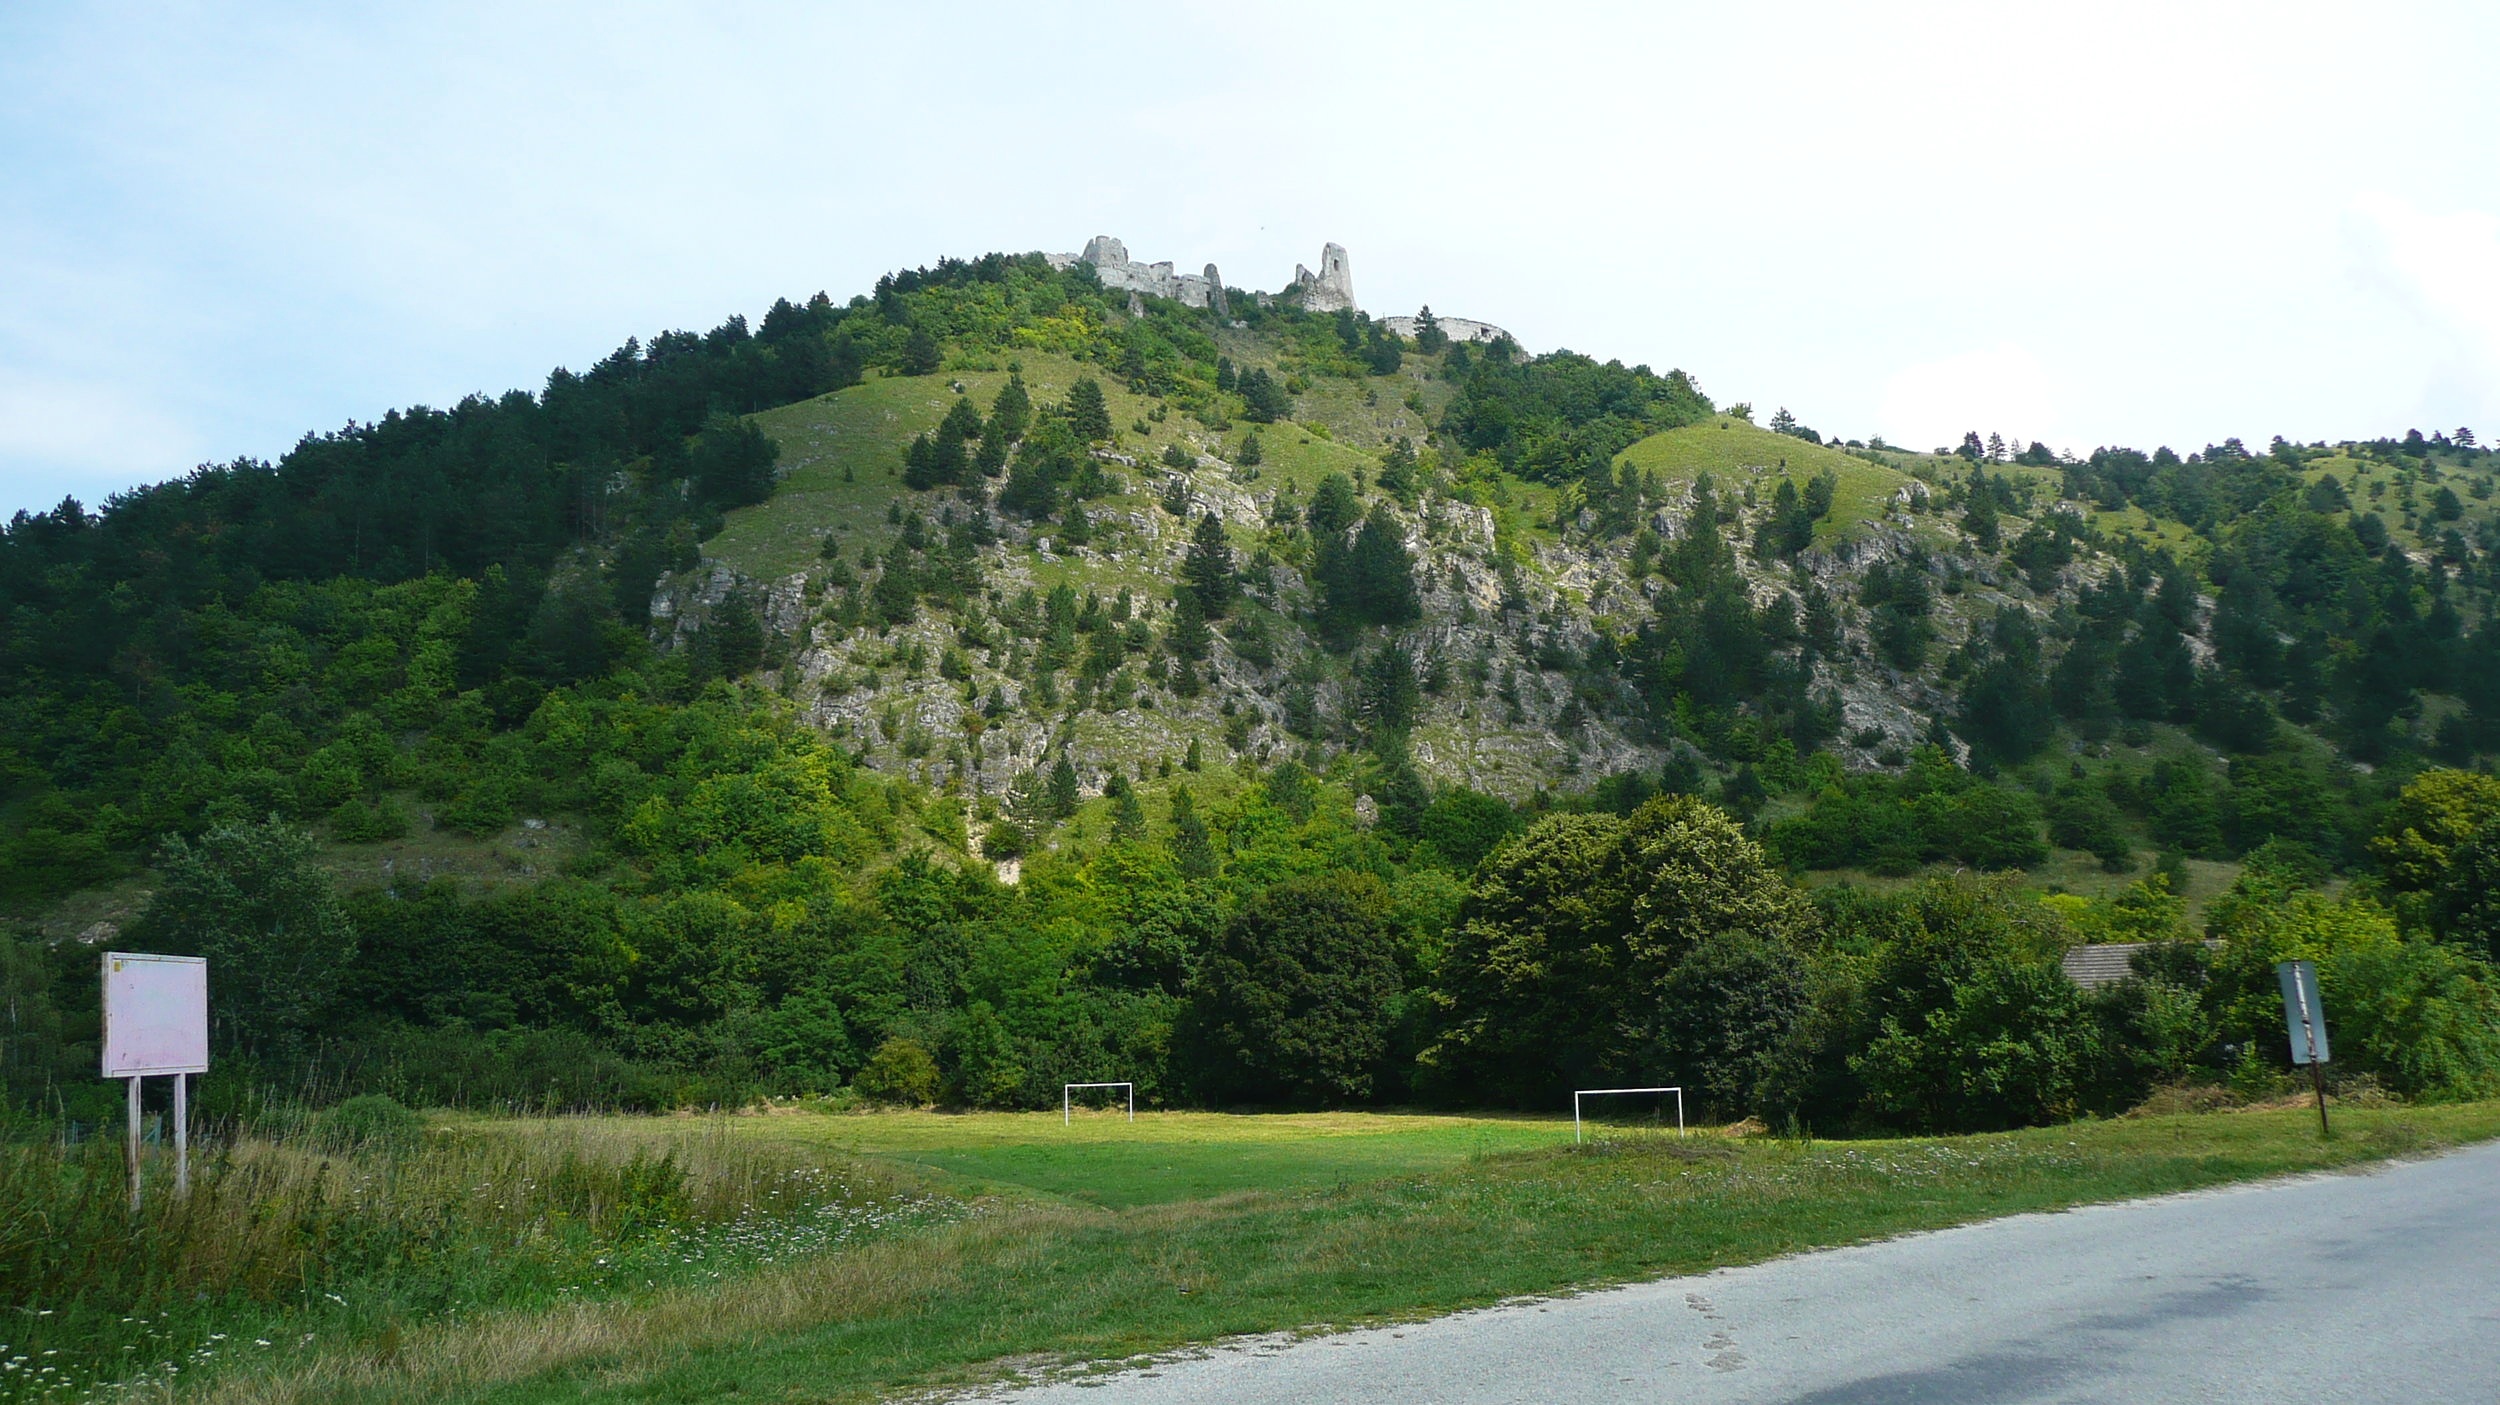  View of Čachtice castle from below, by  Orange.man  –  CC BY-SA 3.0  